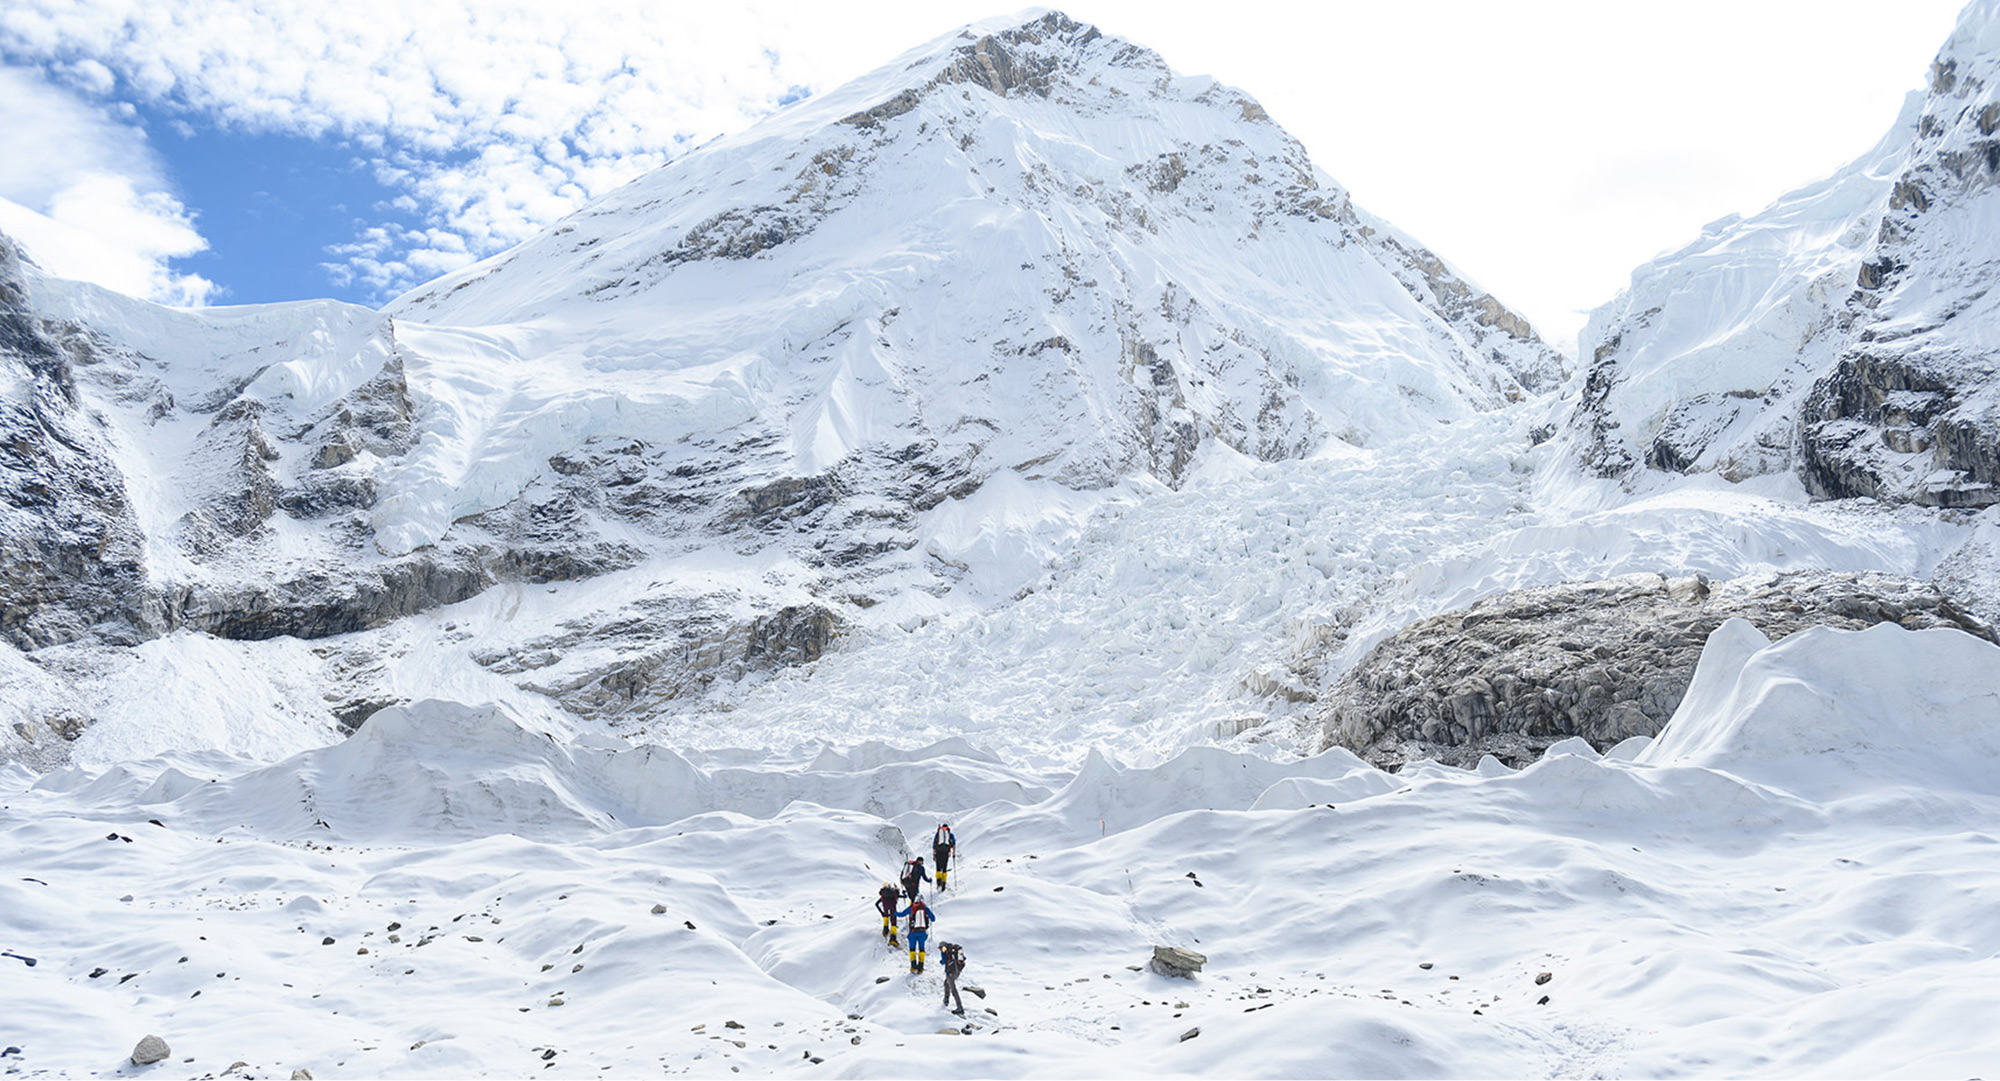 Everest Base Camp - into the Icefall